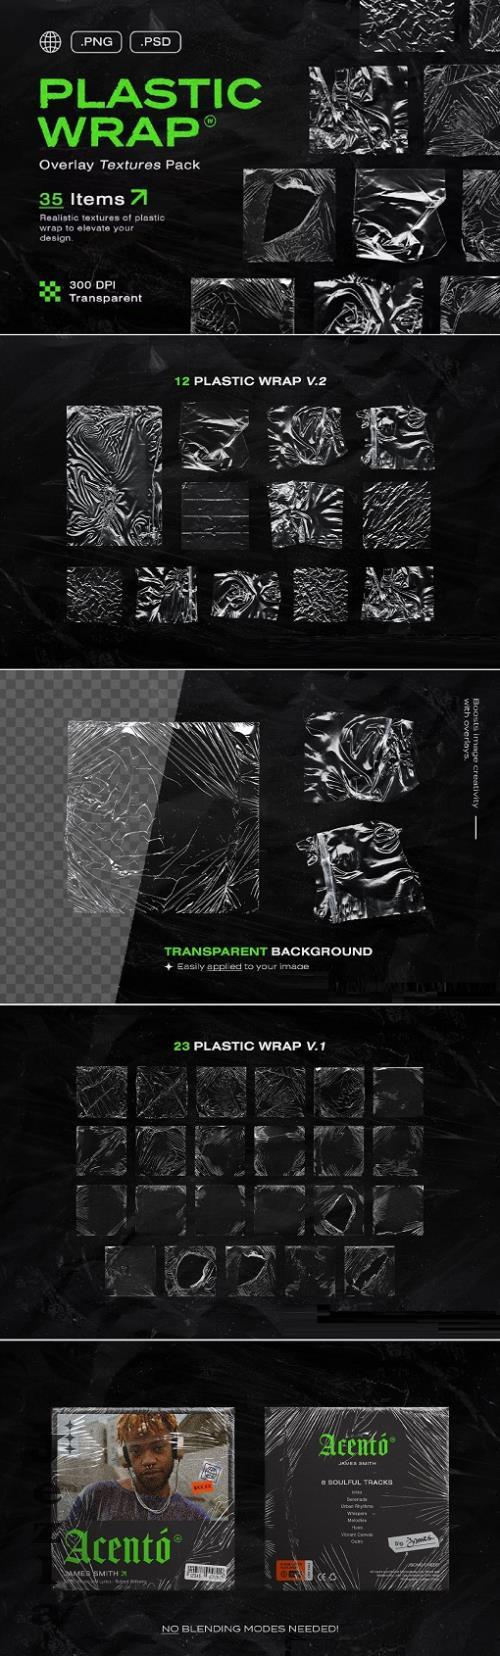 Plastic Wrap Overlay Textures Pack - 4EQWLNH